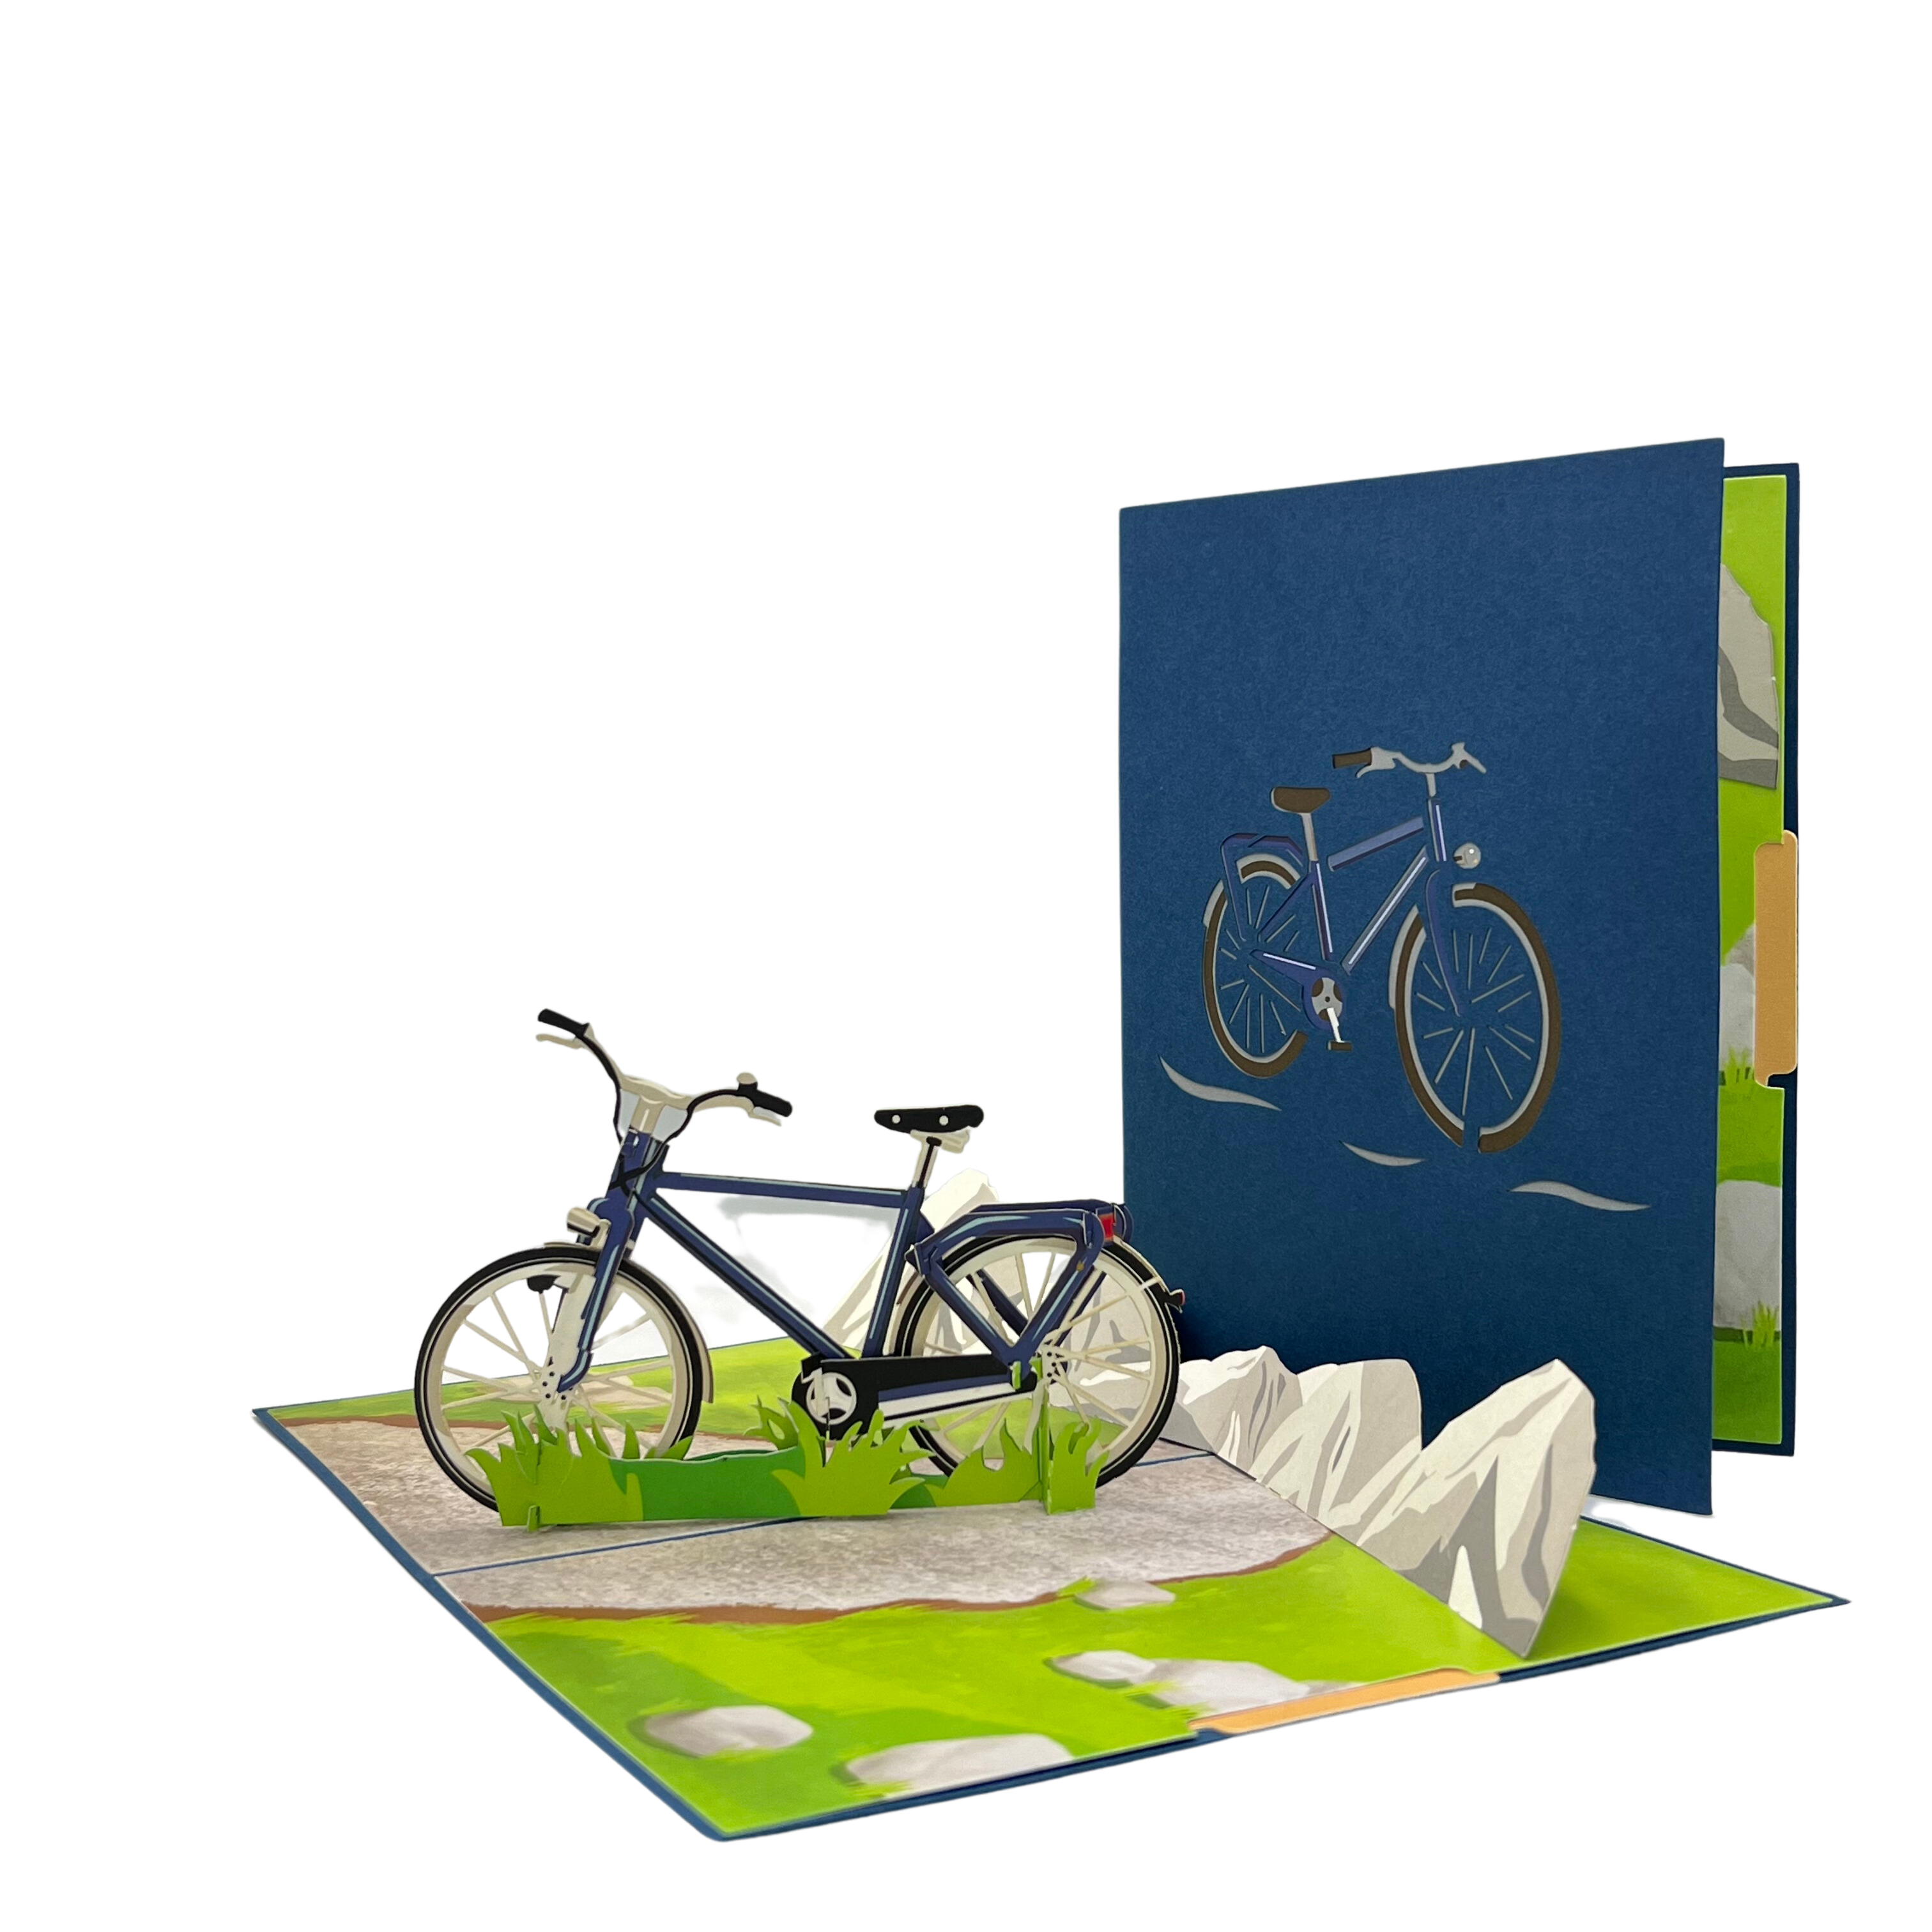 Pop Up Greeting Card Adventure Bicycle Nature Outdoor Camping Card Thank You Birthday Gift for Nature Bike Lover For Mom Dad Family Friend